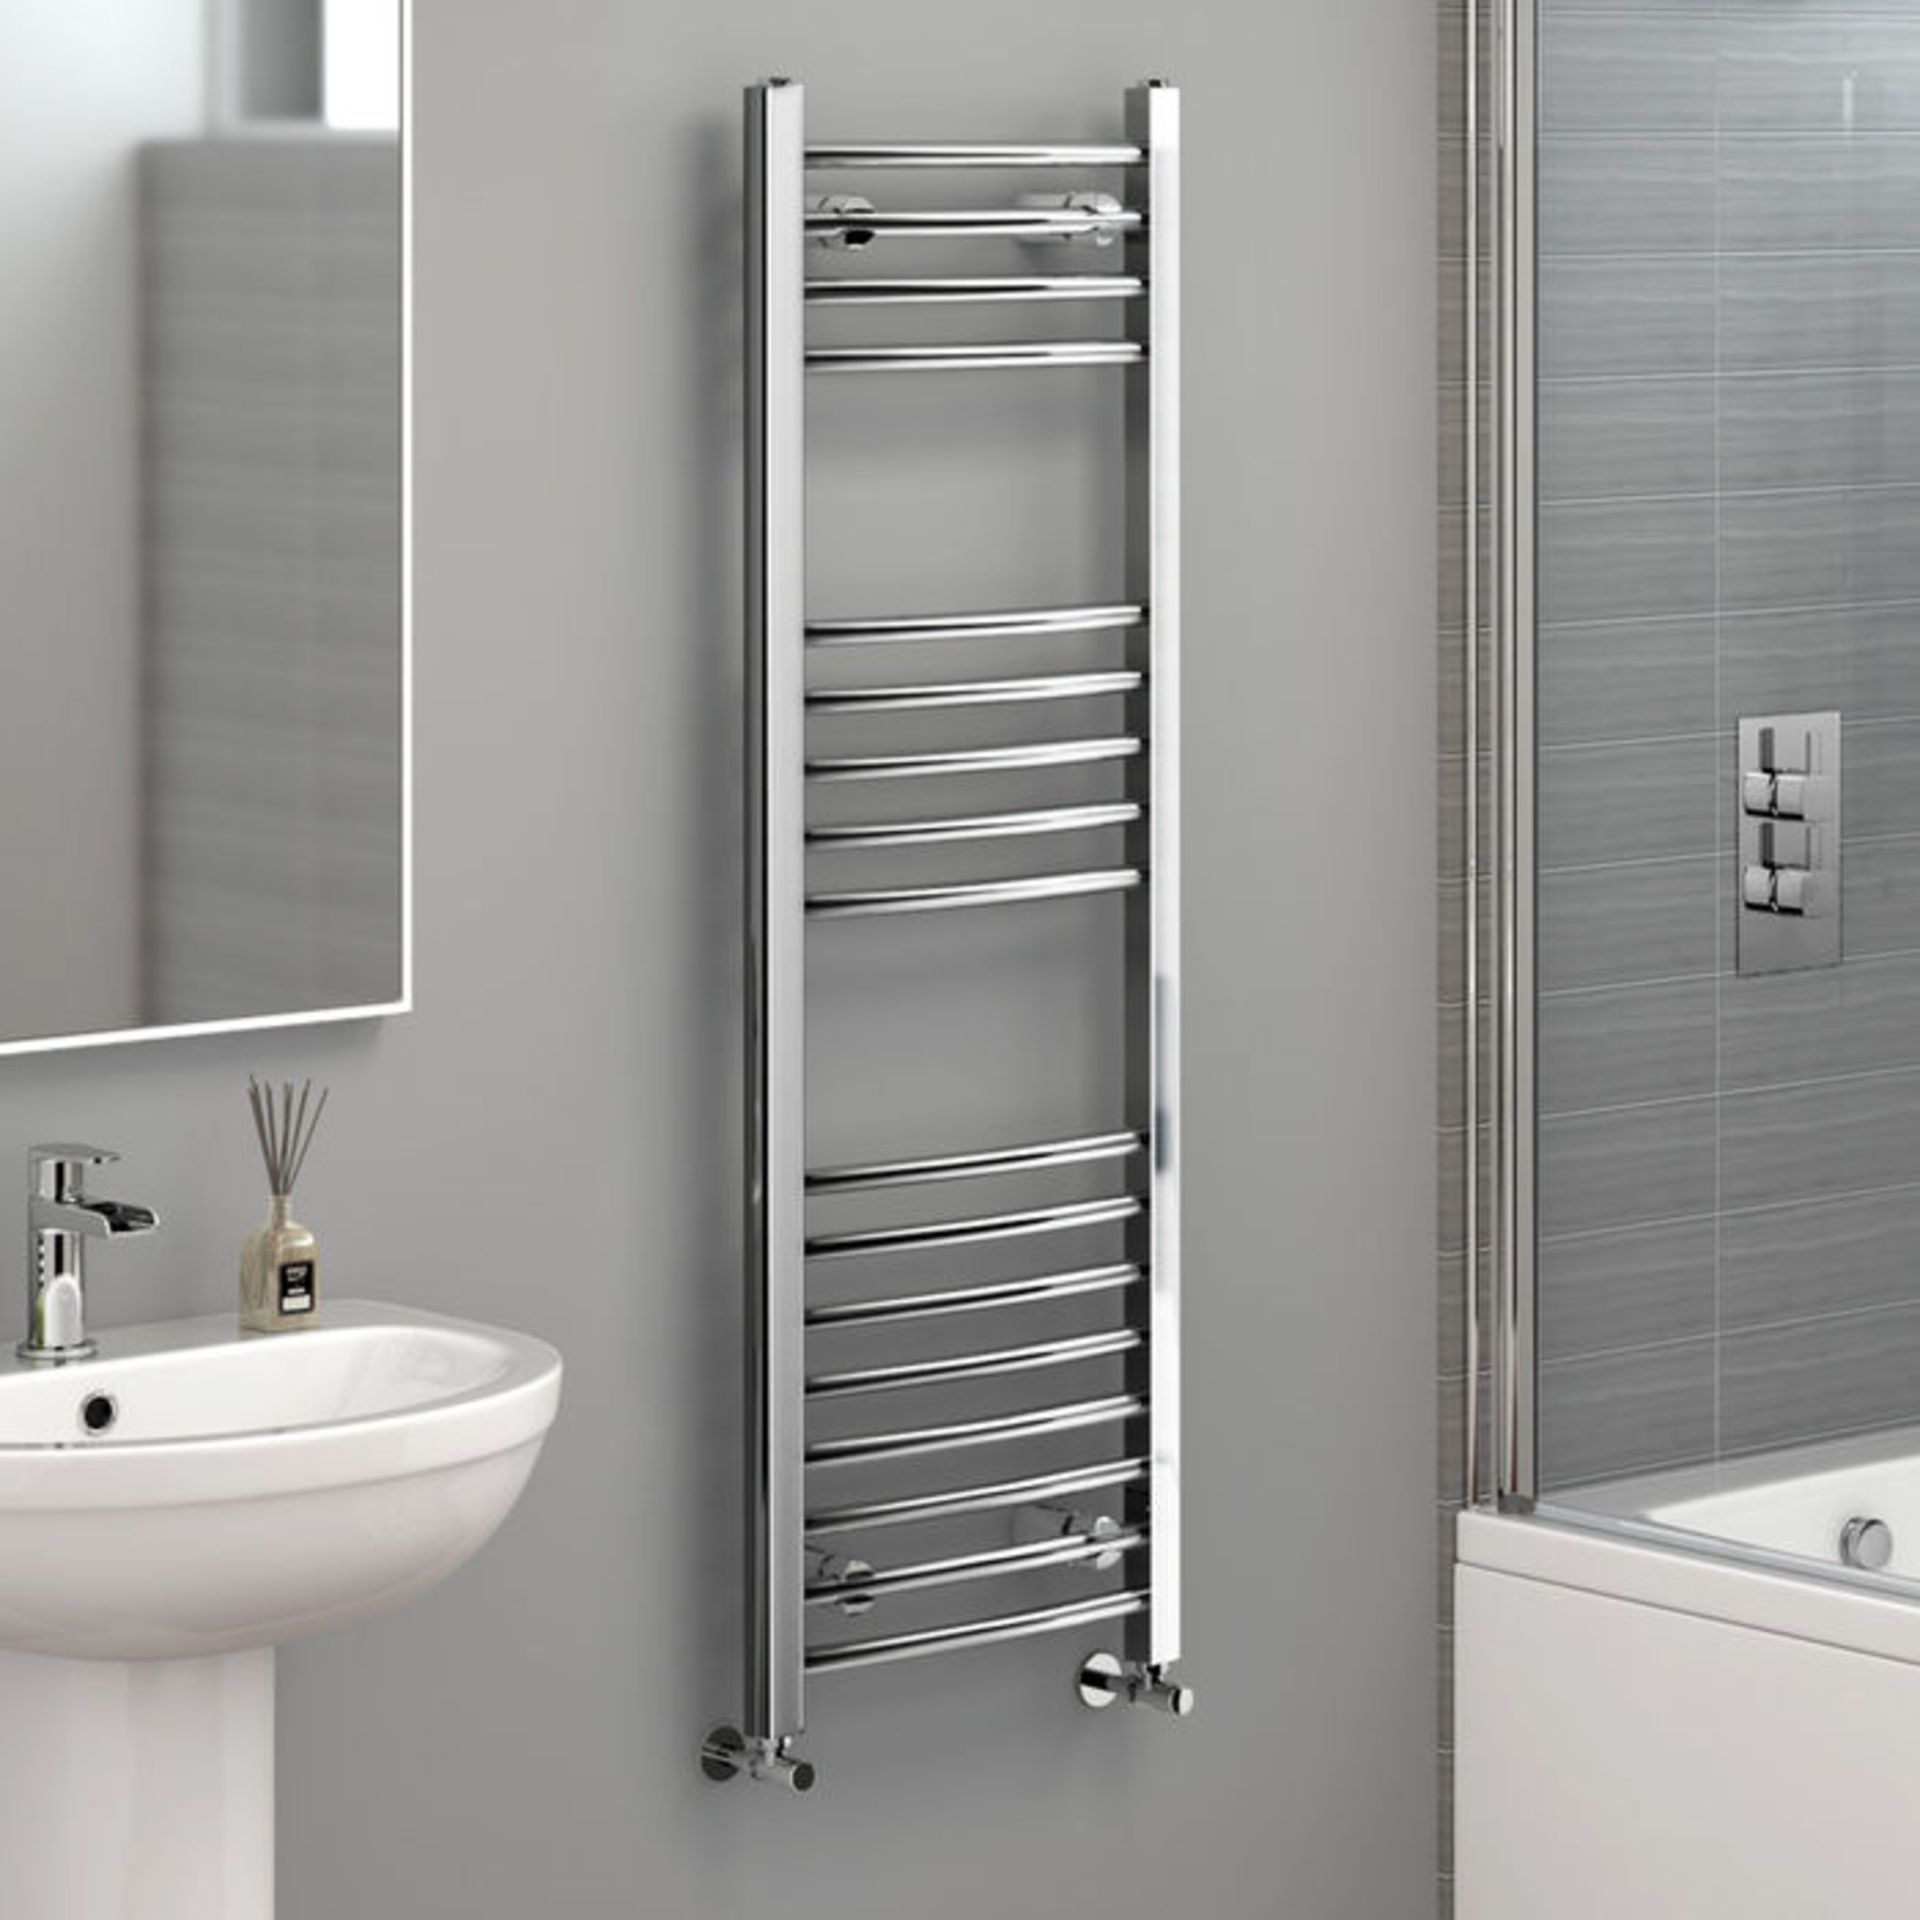 (S114) 1200x400mm - 20mm Tubes - Chrome Curved Rail Ladder Towel Radiator. Low carbon steel chrome